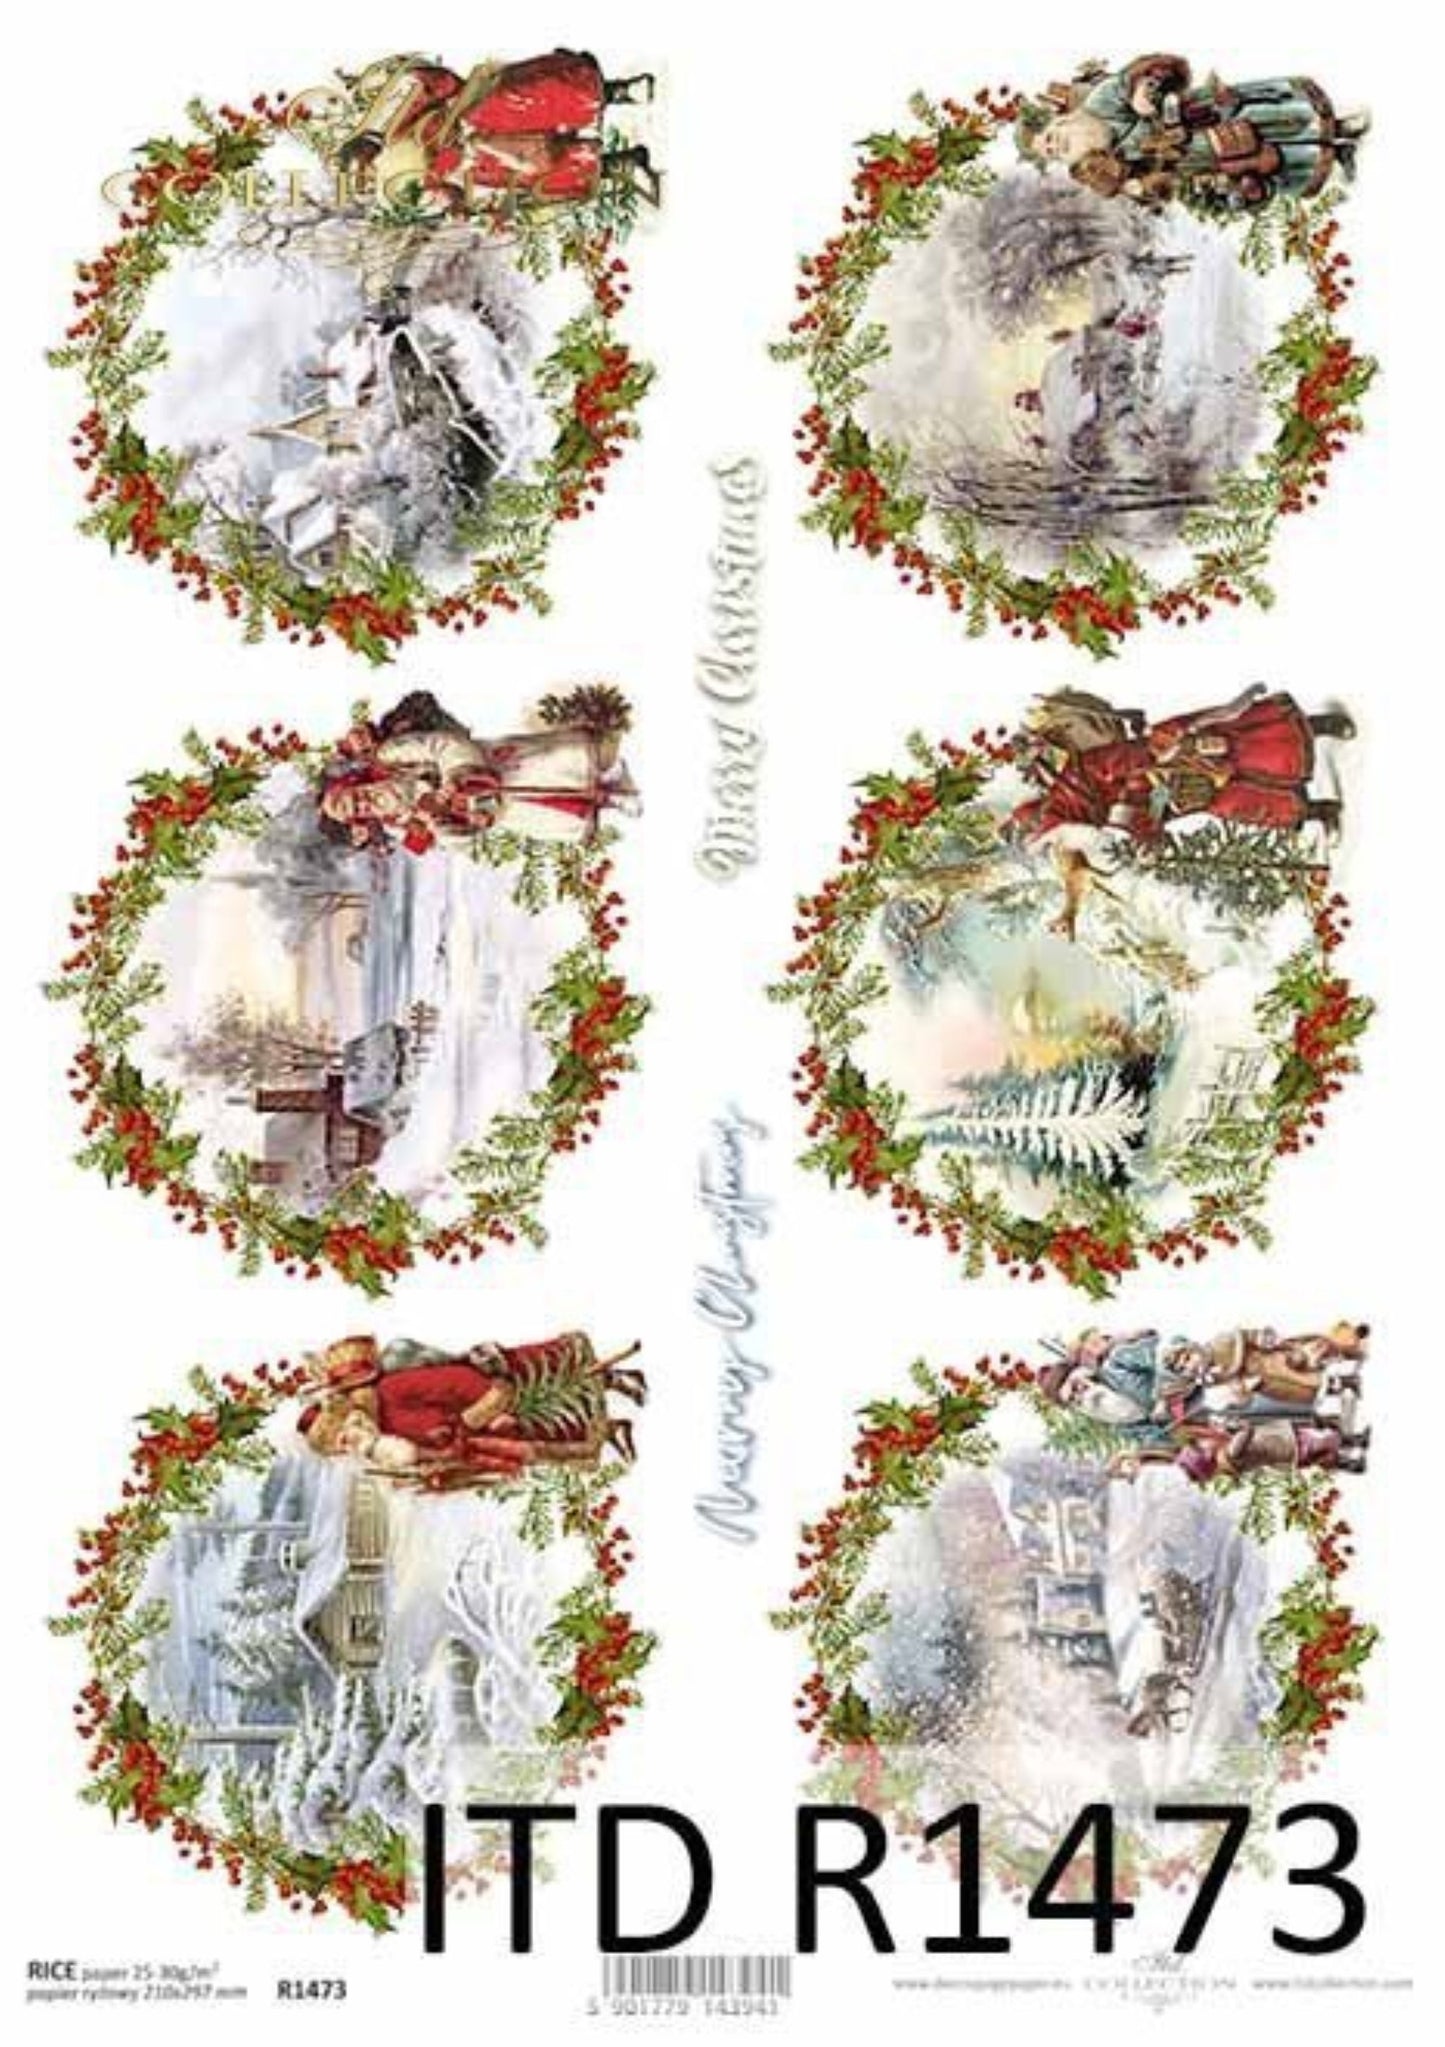 ITD Collection Rice Paper for Decoupage R1473, Size A4 - 210x297 mm, 8.27x11.7 inch, Christmas Rounds, decorations, wreaths, holly, Santa